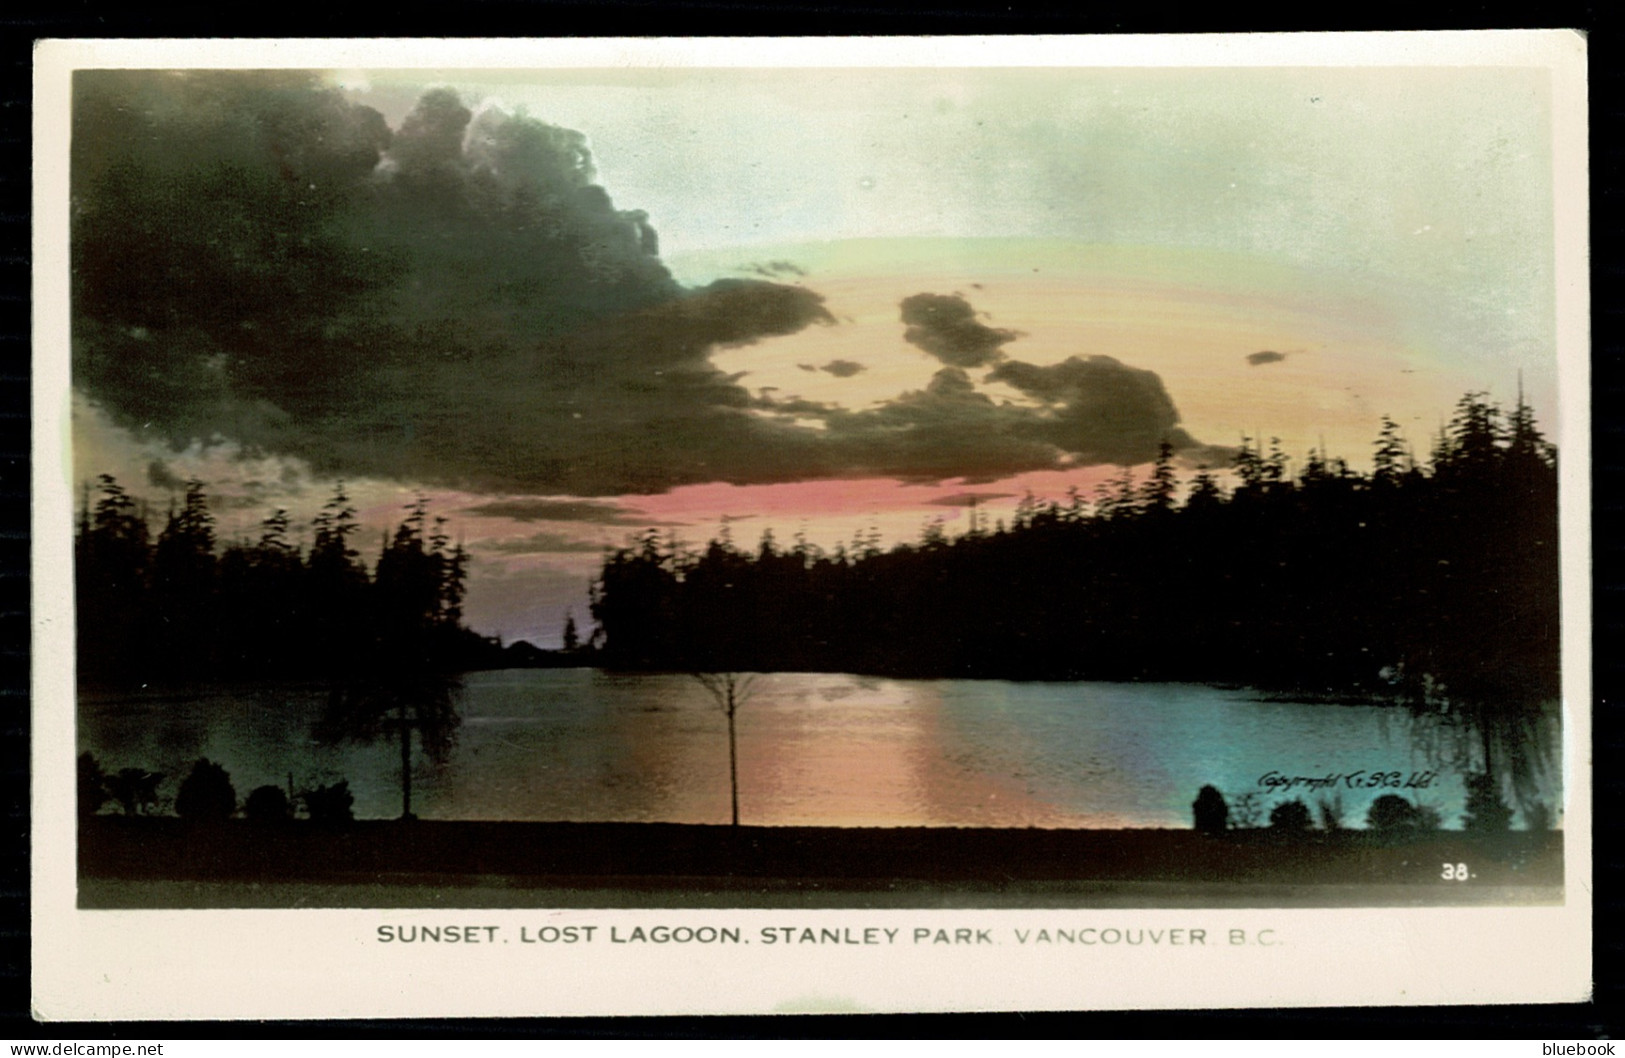 Ref 1620 - Real Photo Postcard - Sunset Lost Lagoon Stanley Park - Vancouver B.C. Canada - Vancouver